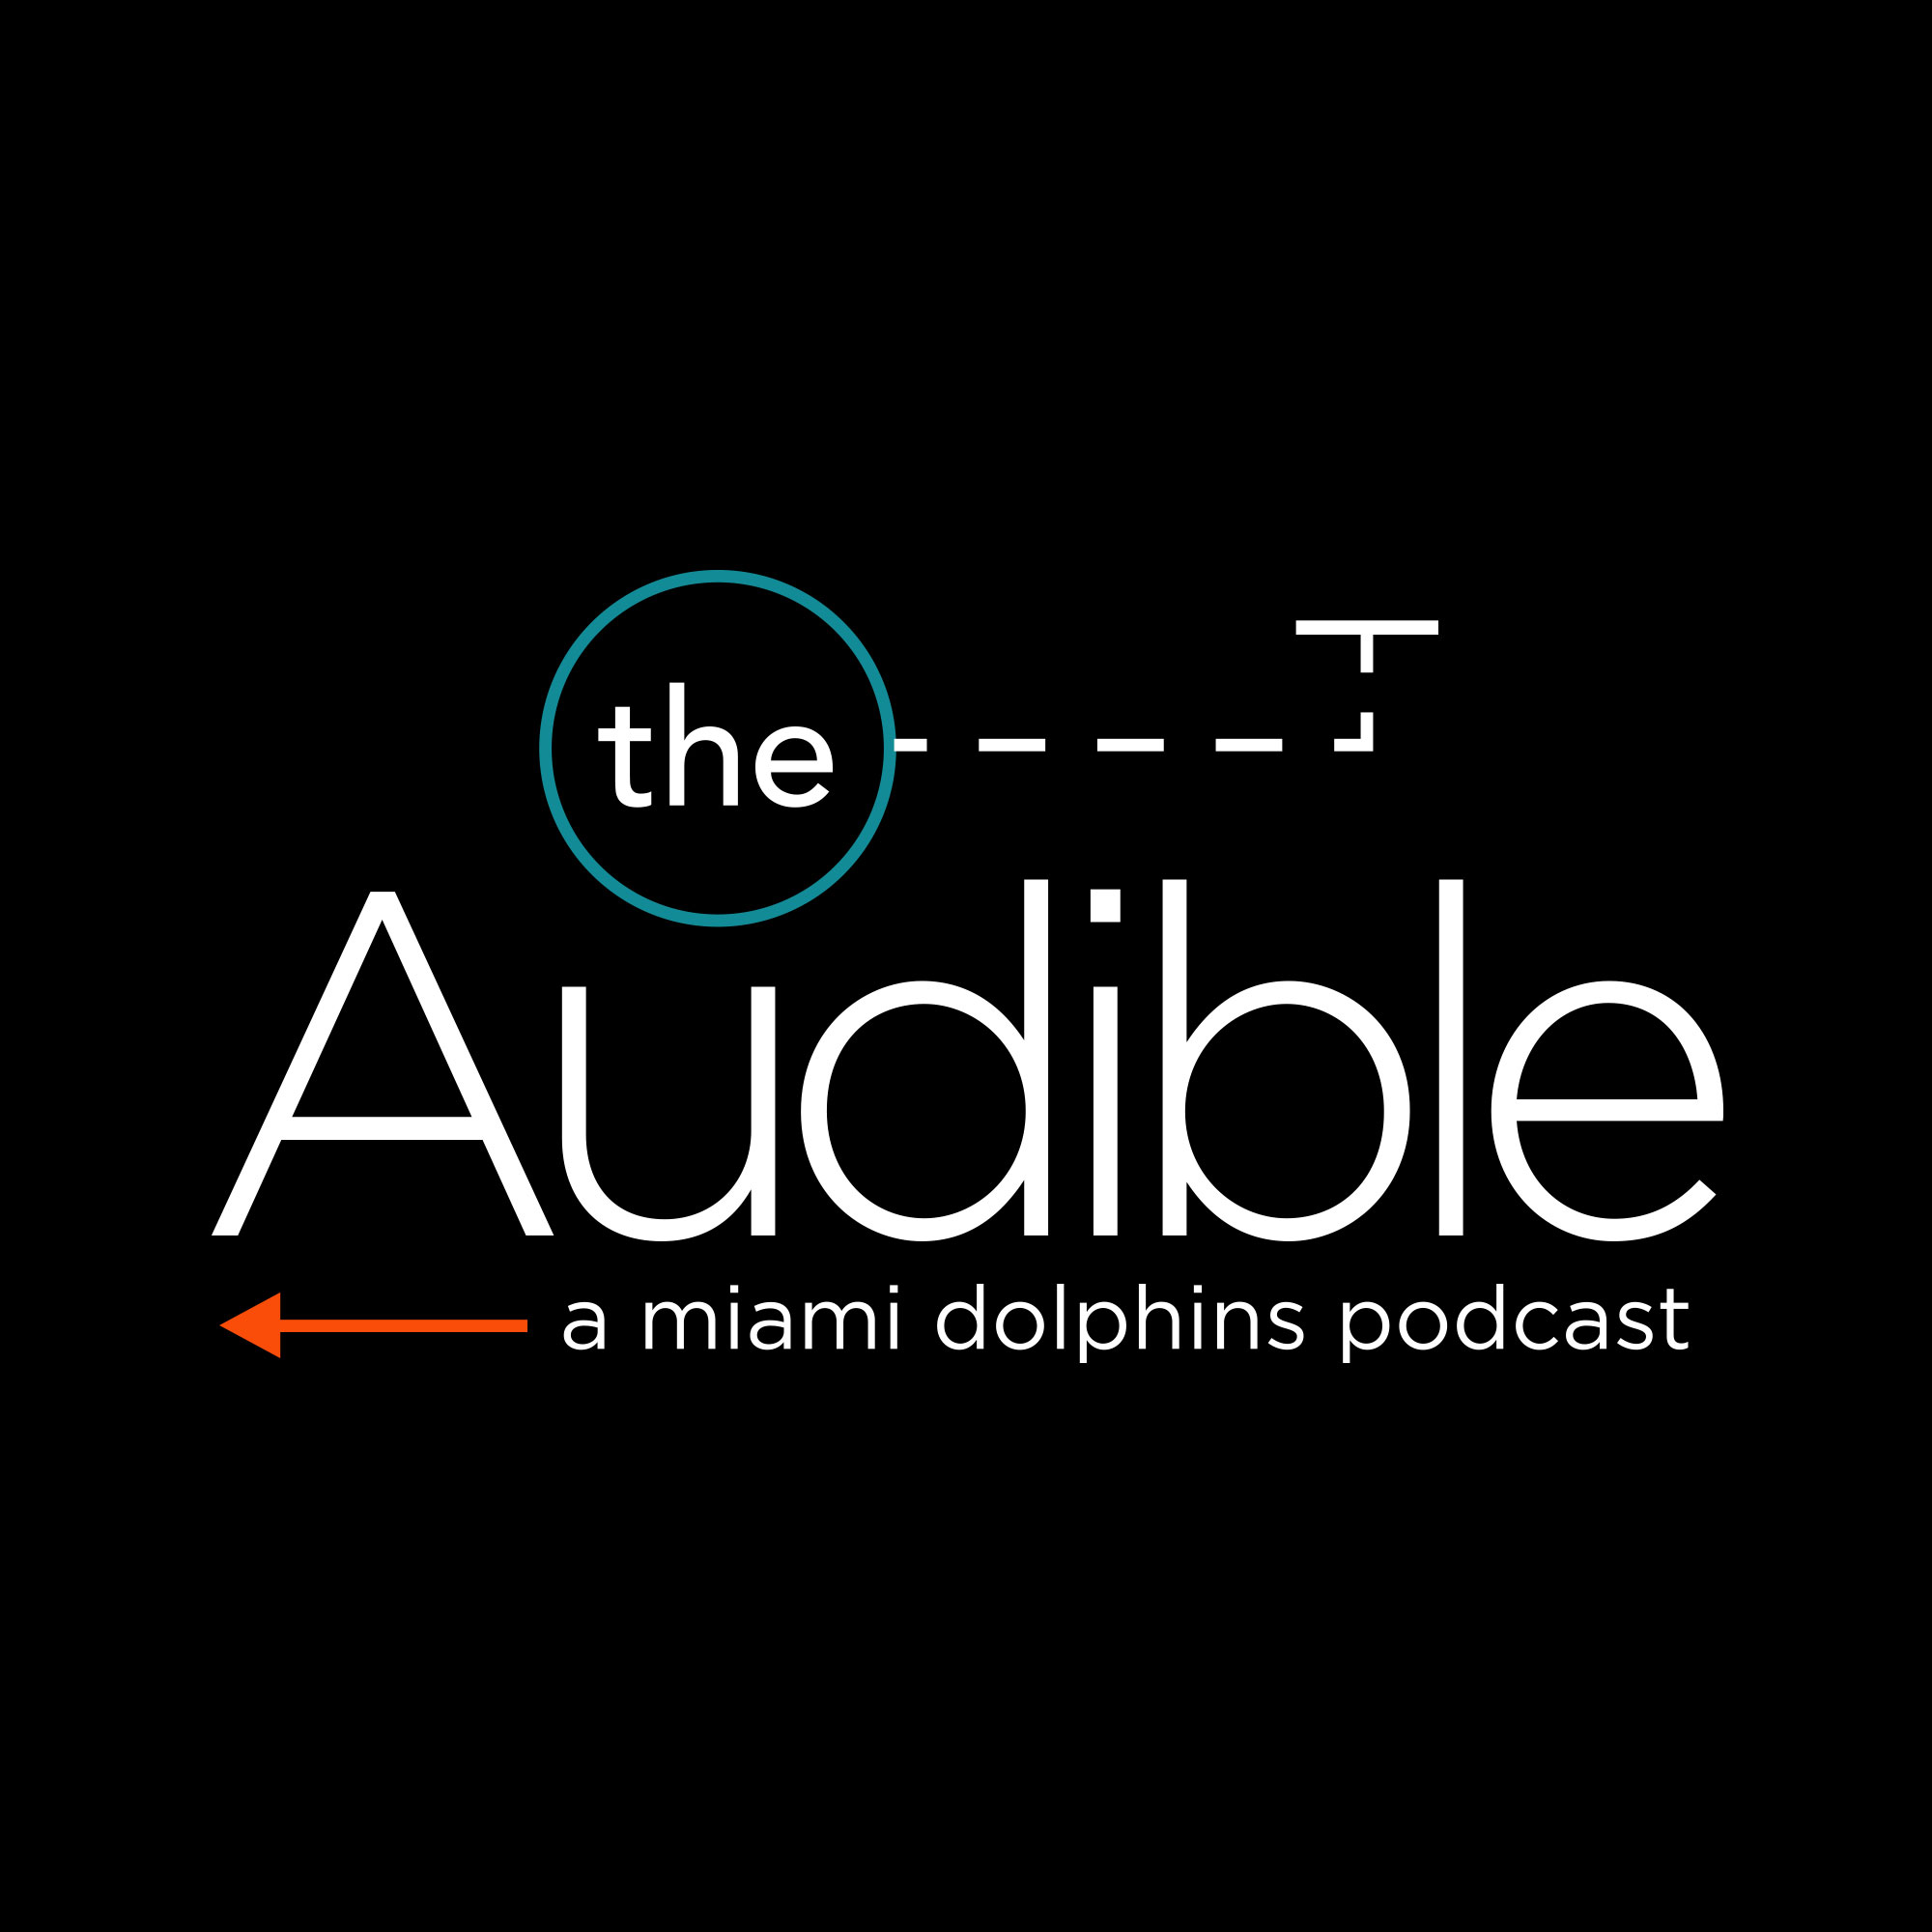 Pre-Draft Special with Kim and John | The Audible Episode 153